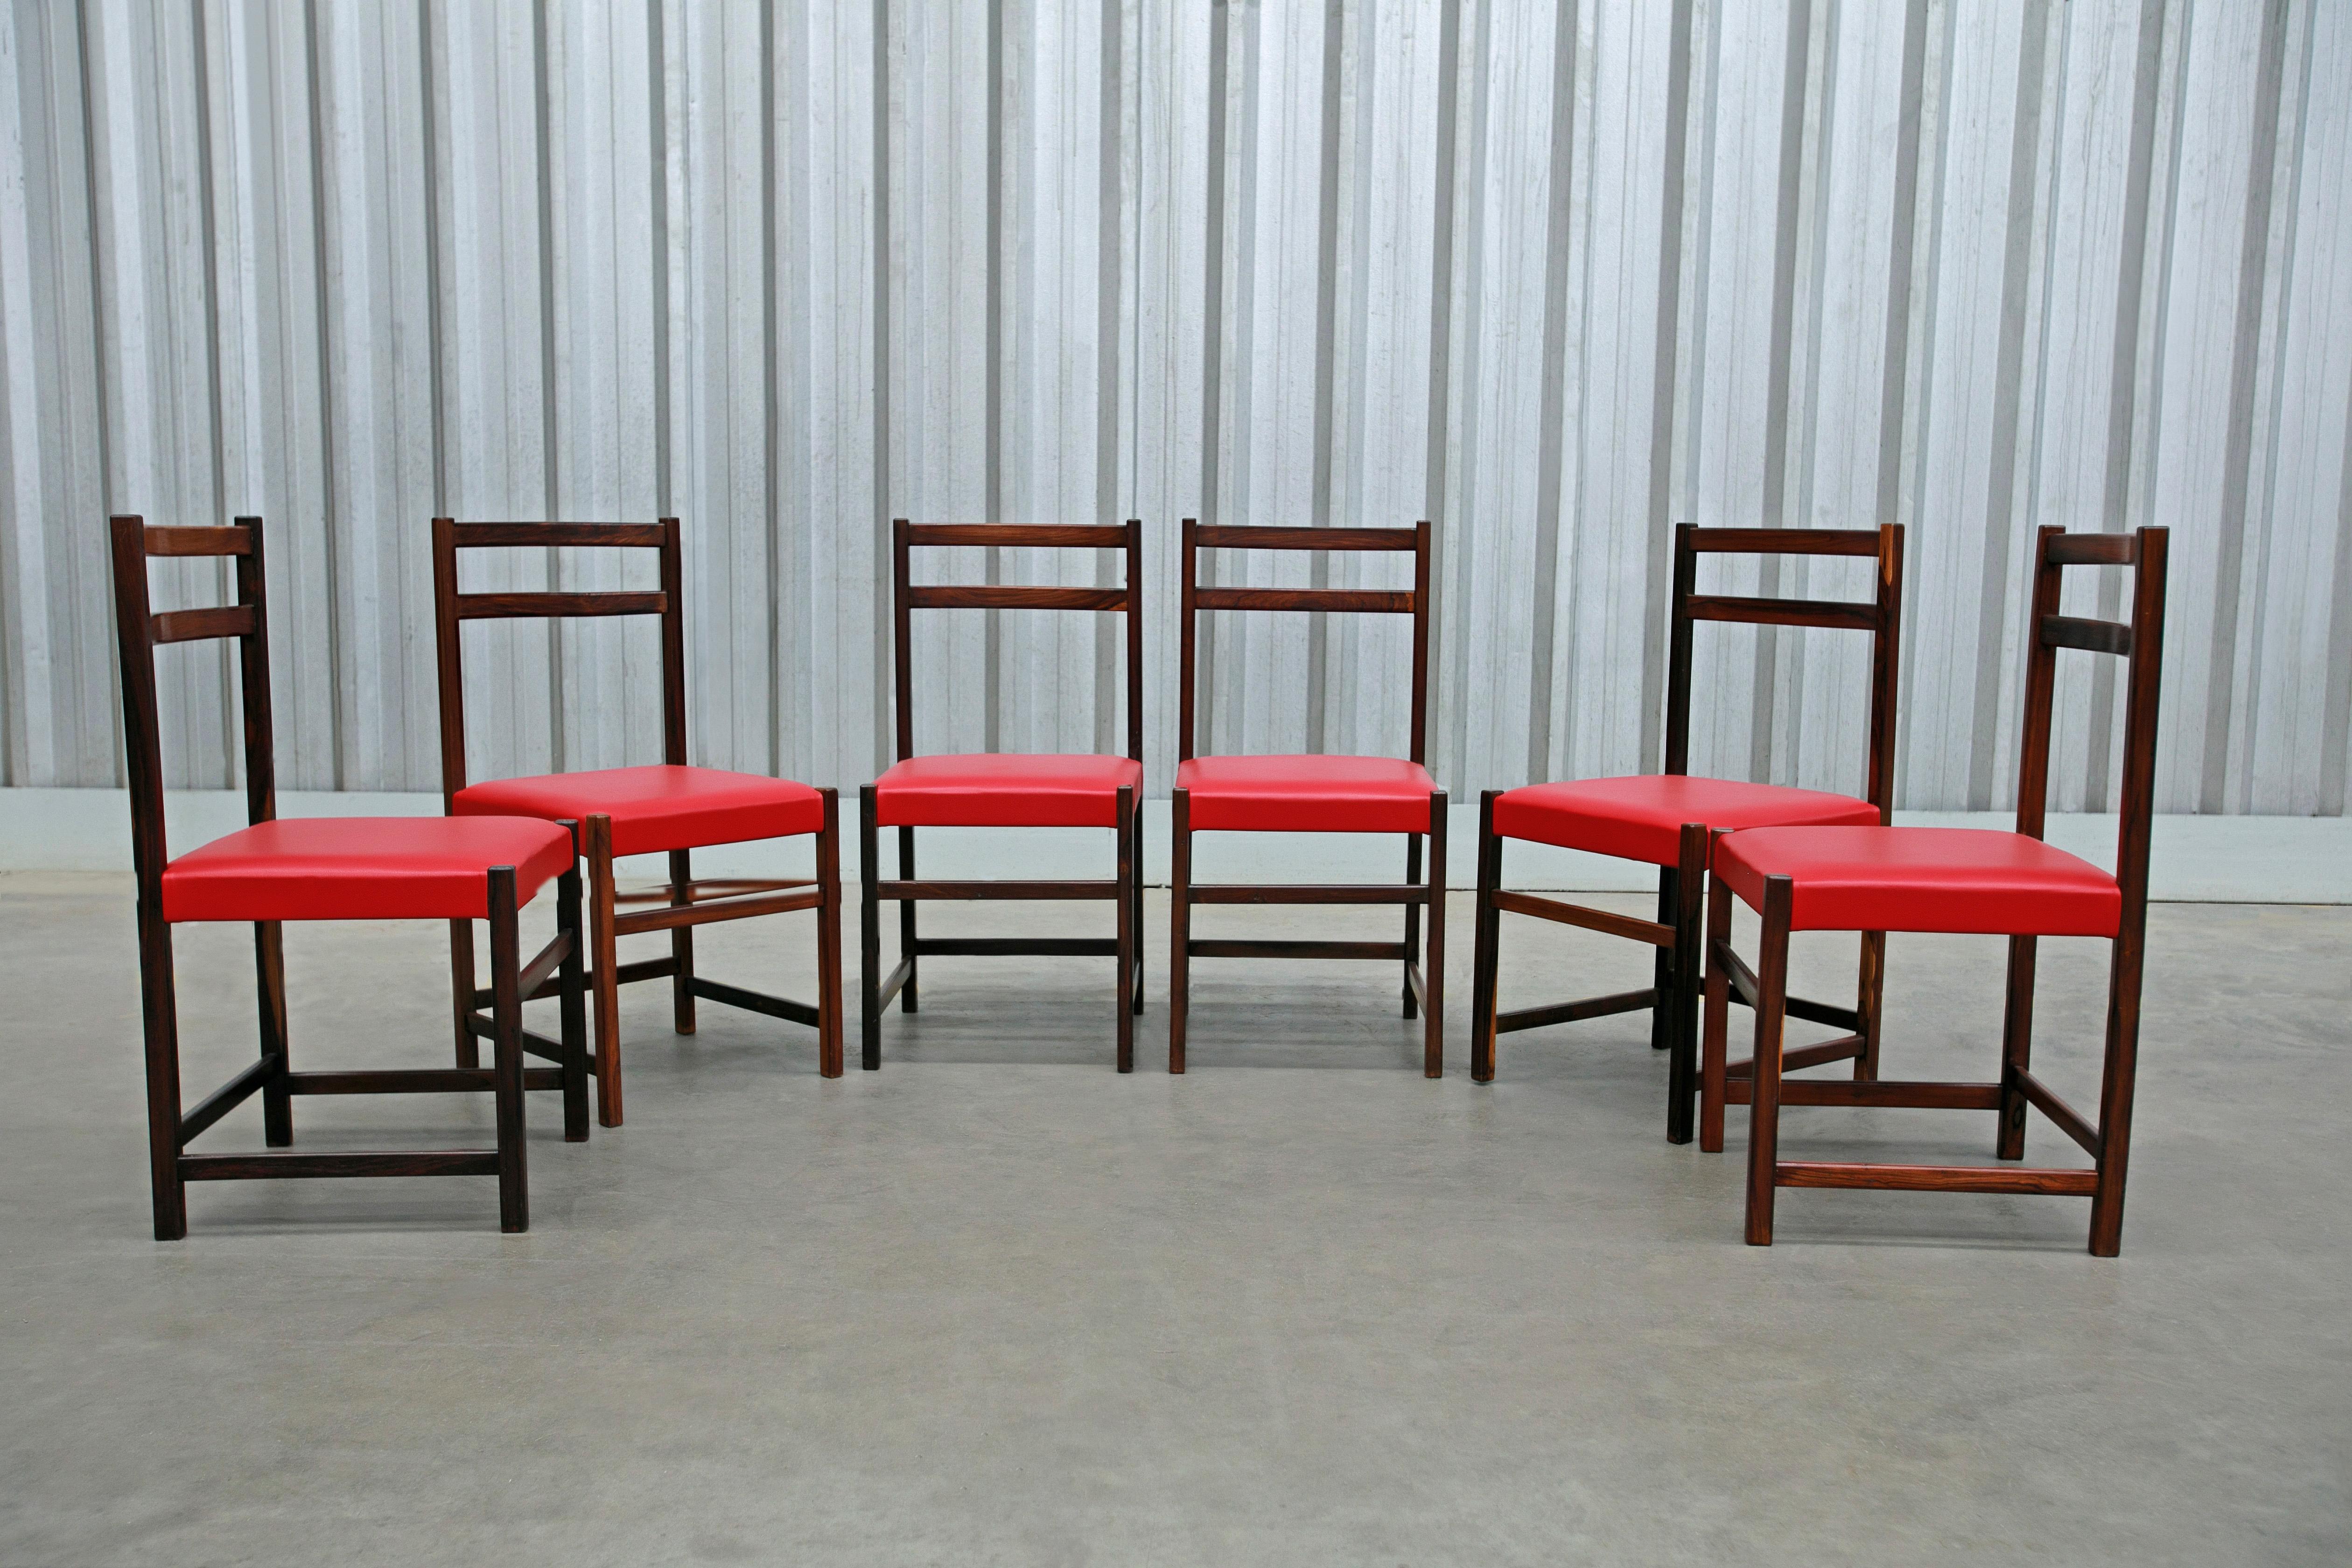 Available TODAY in NYC including FREE DOMESTIC SHIPPING, these Set of Six Chairs in Rosewood & Red Leather by Celina Decoracoes, 1960s are nothing less than gorgeous!

The wood has been refurbished and is in excellent condition. The red leather is